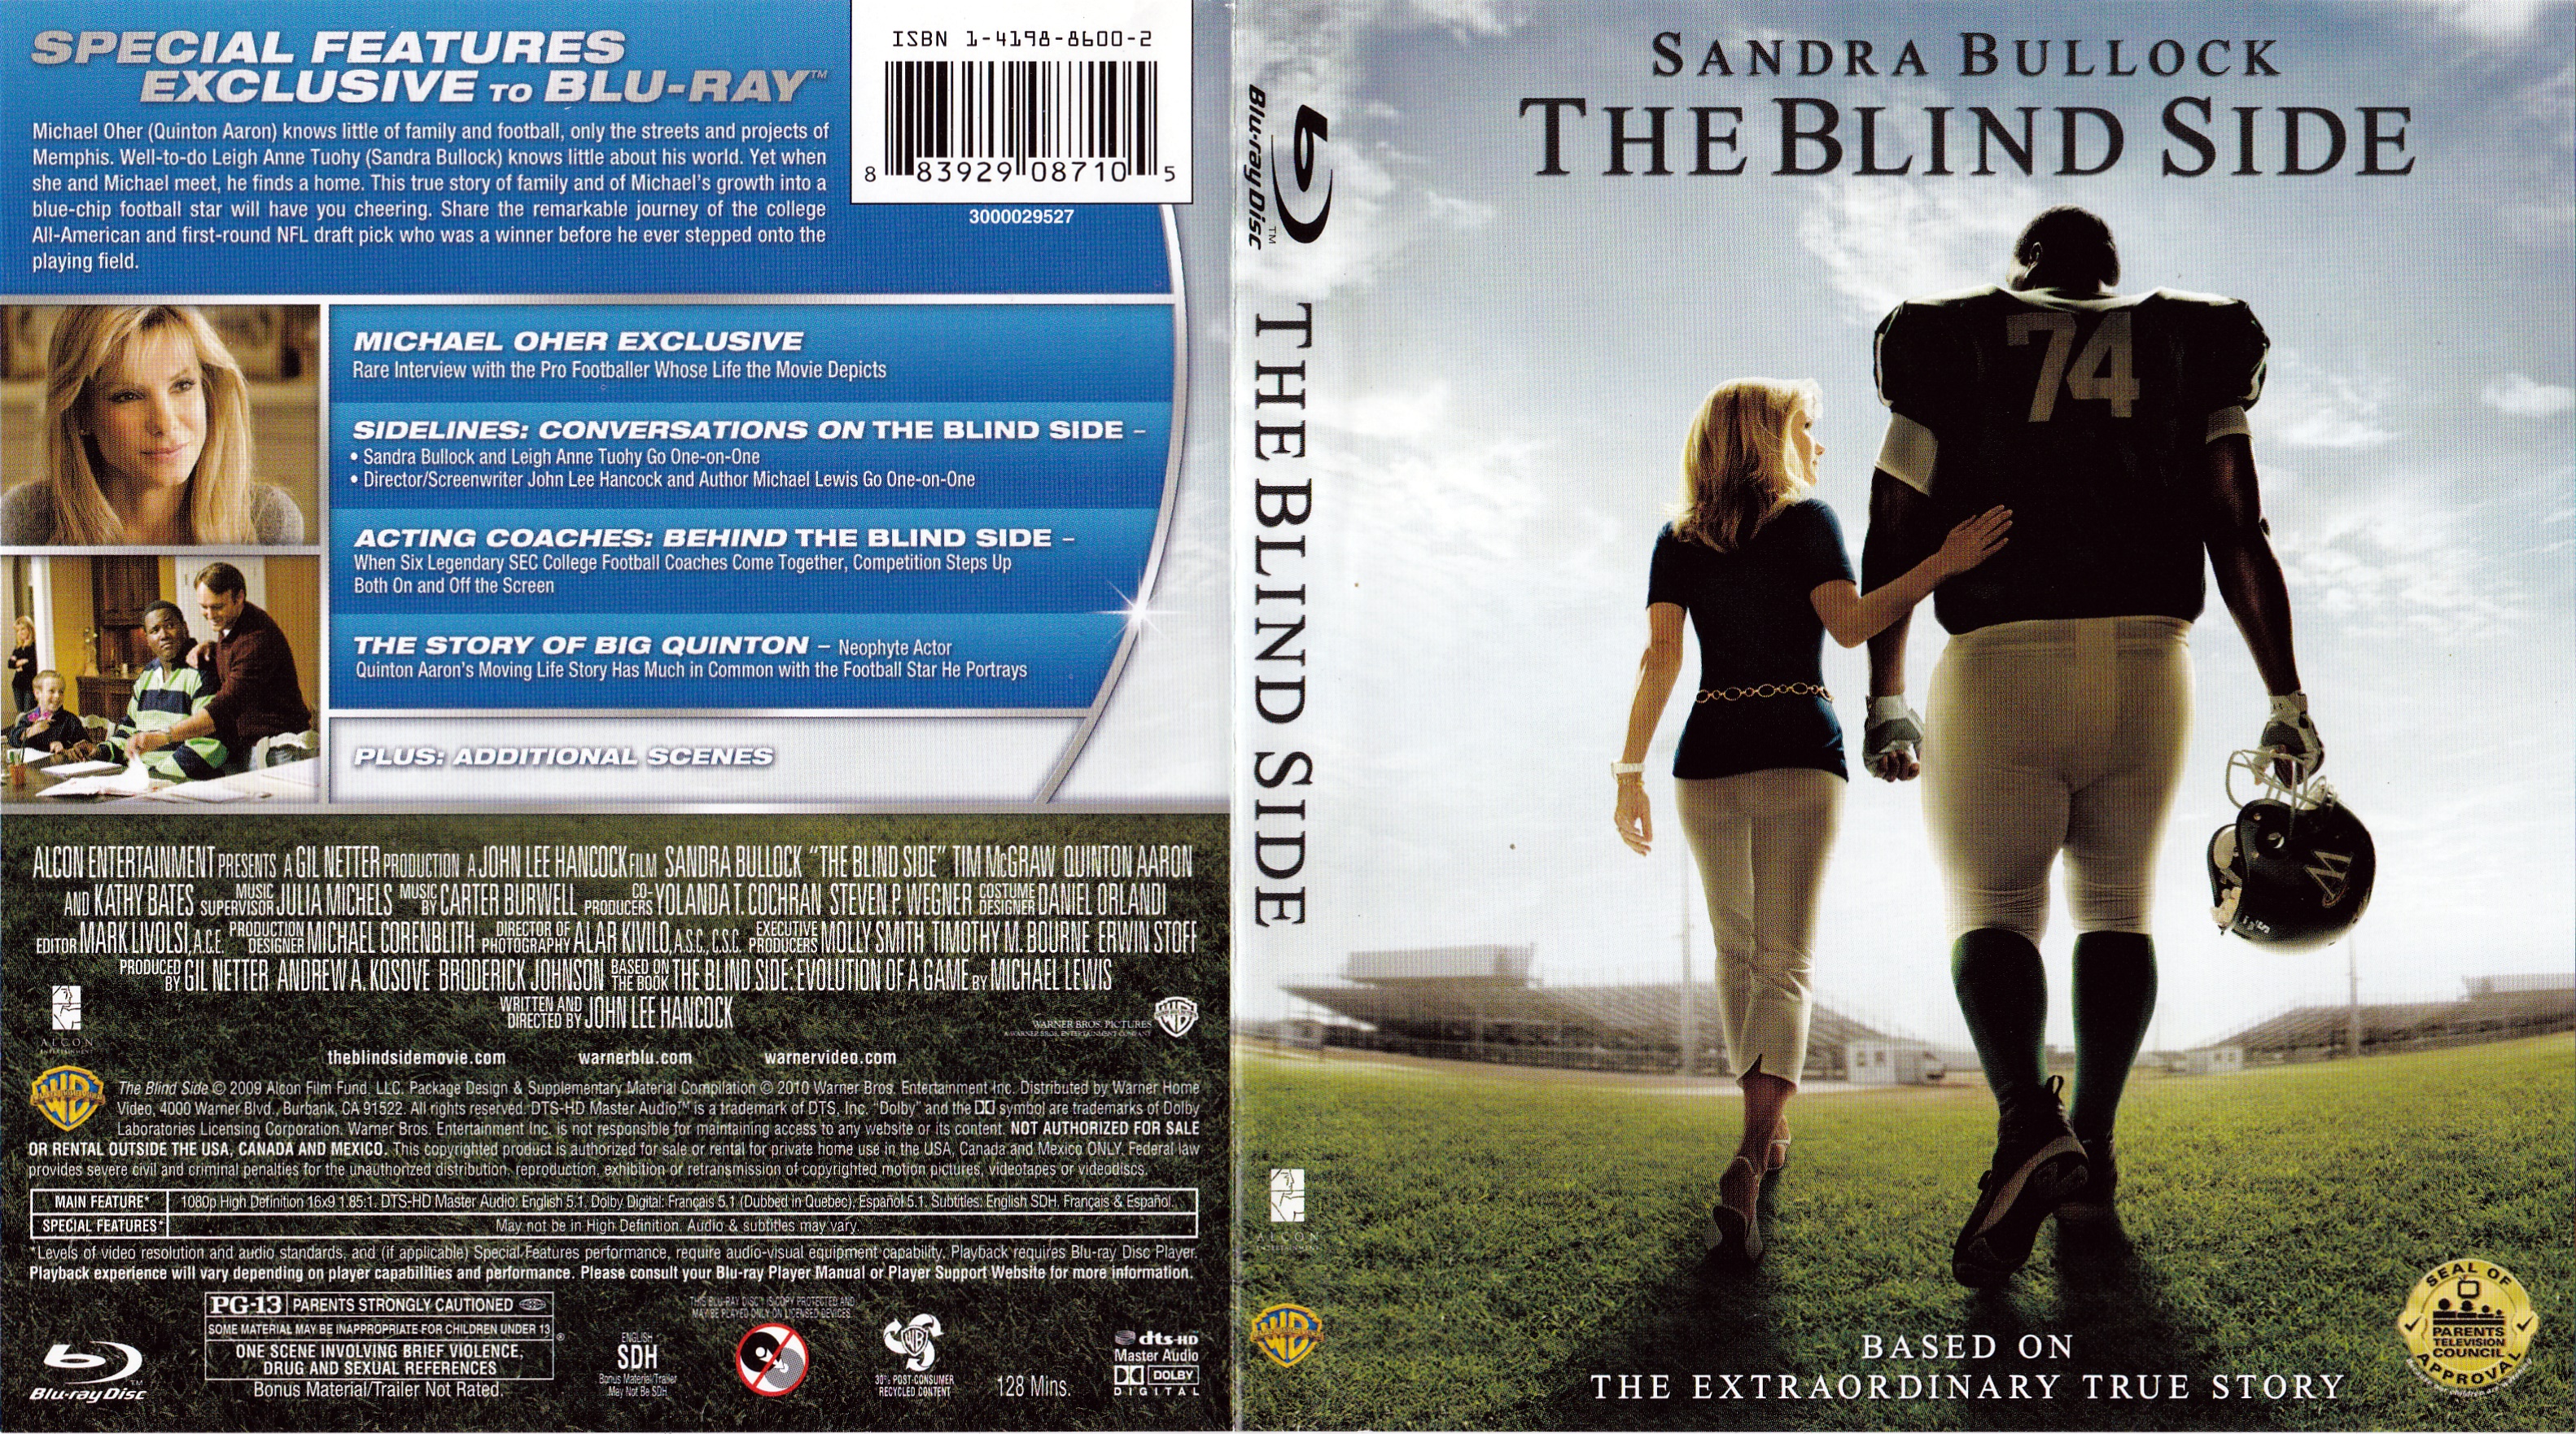 Jaquette DVD The blind side (BLU-RAY)